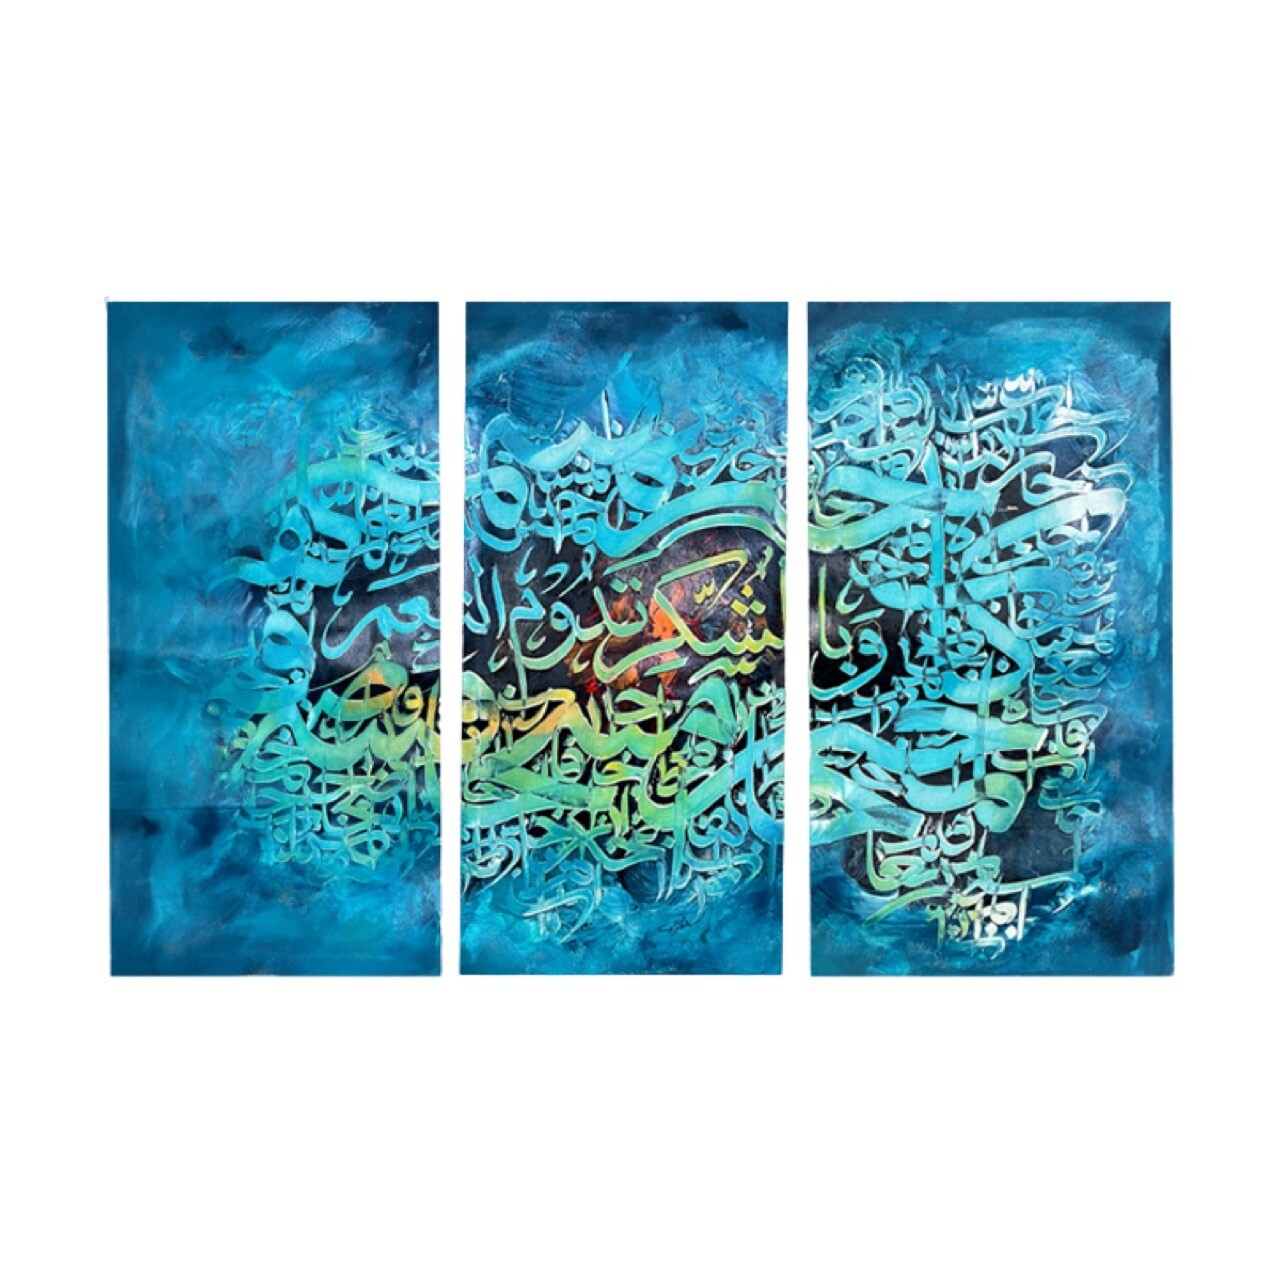 Gratitude increases ones blessings - Islamic Proverb - Abstract Stylistic Design Textured Oil Painting